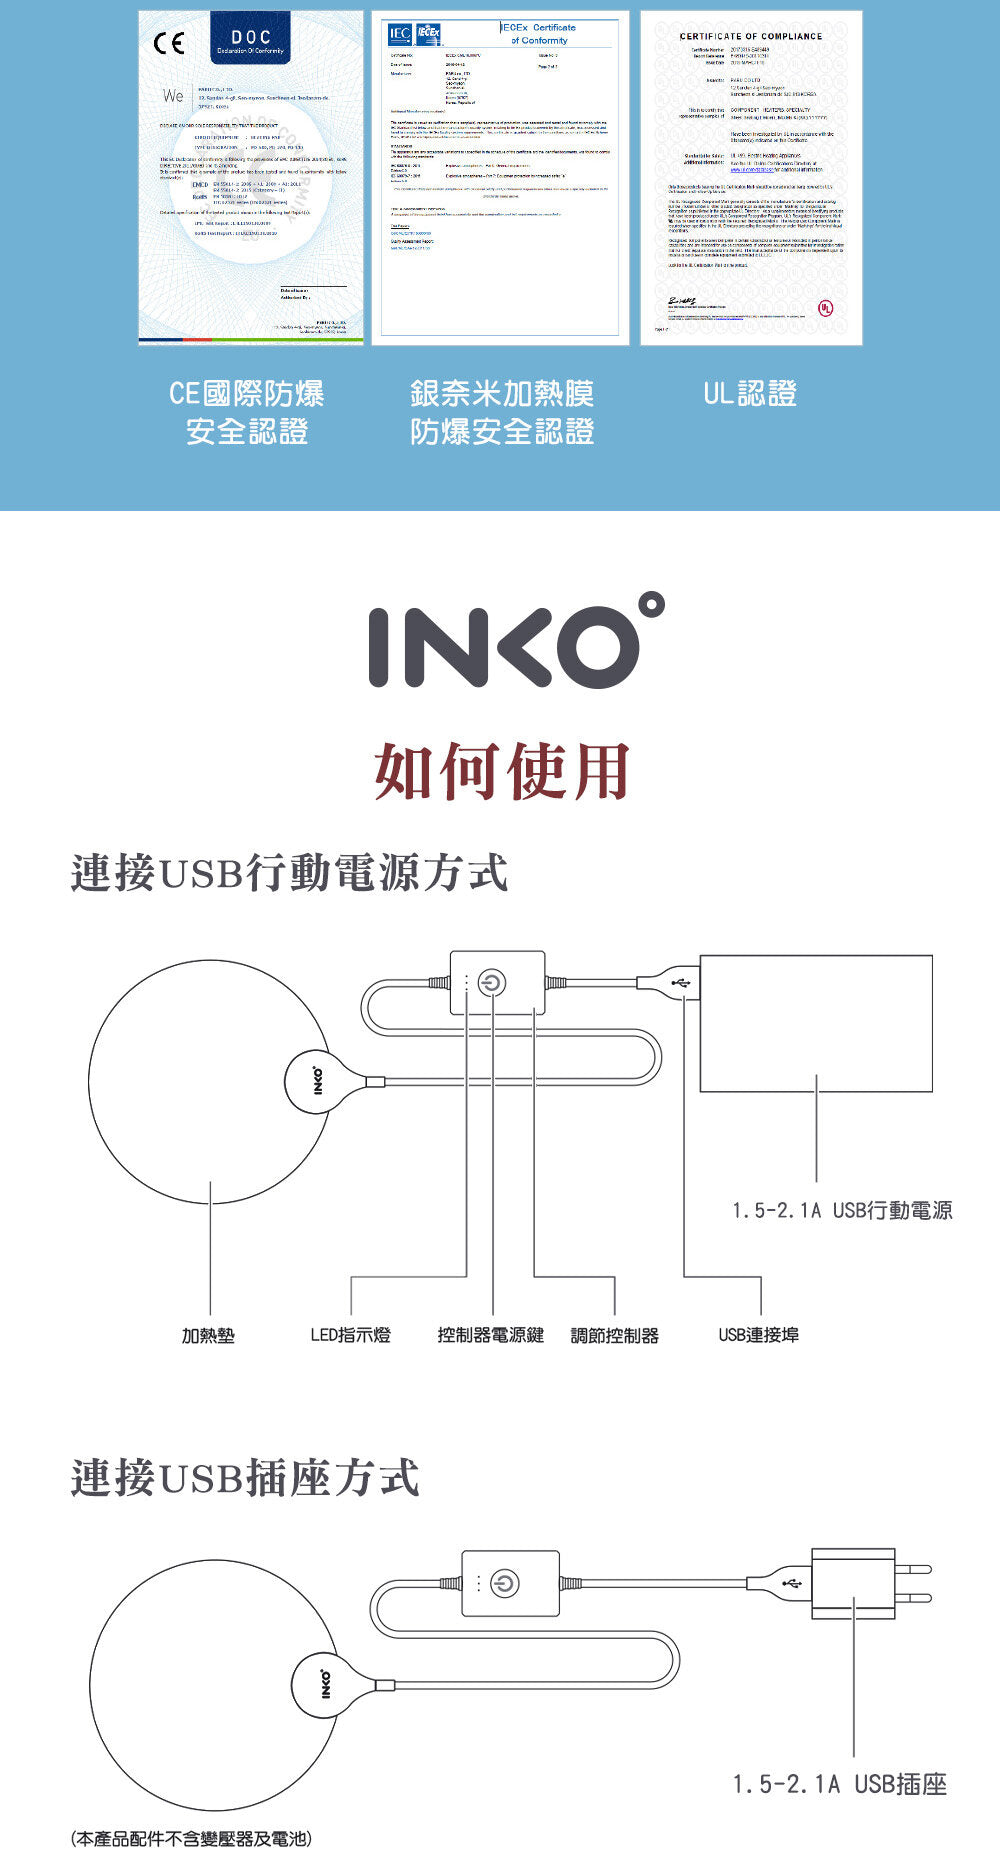 Inko - Smart Heating Mat HEAL ultra-thin thermal pad (suede) PD-S270